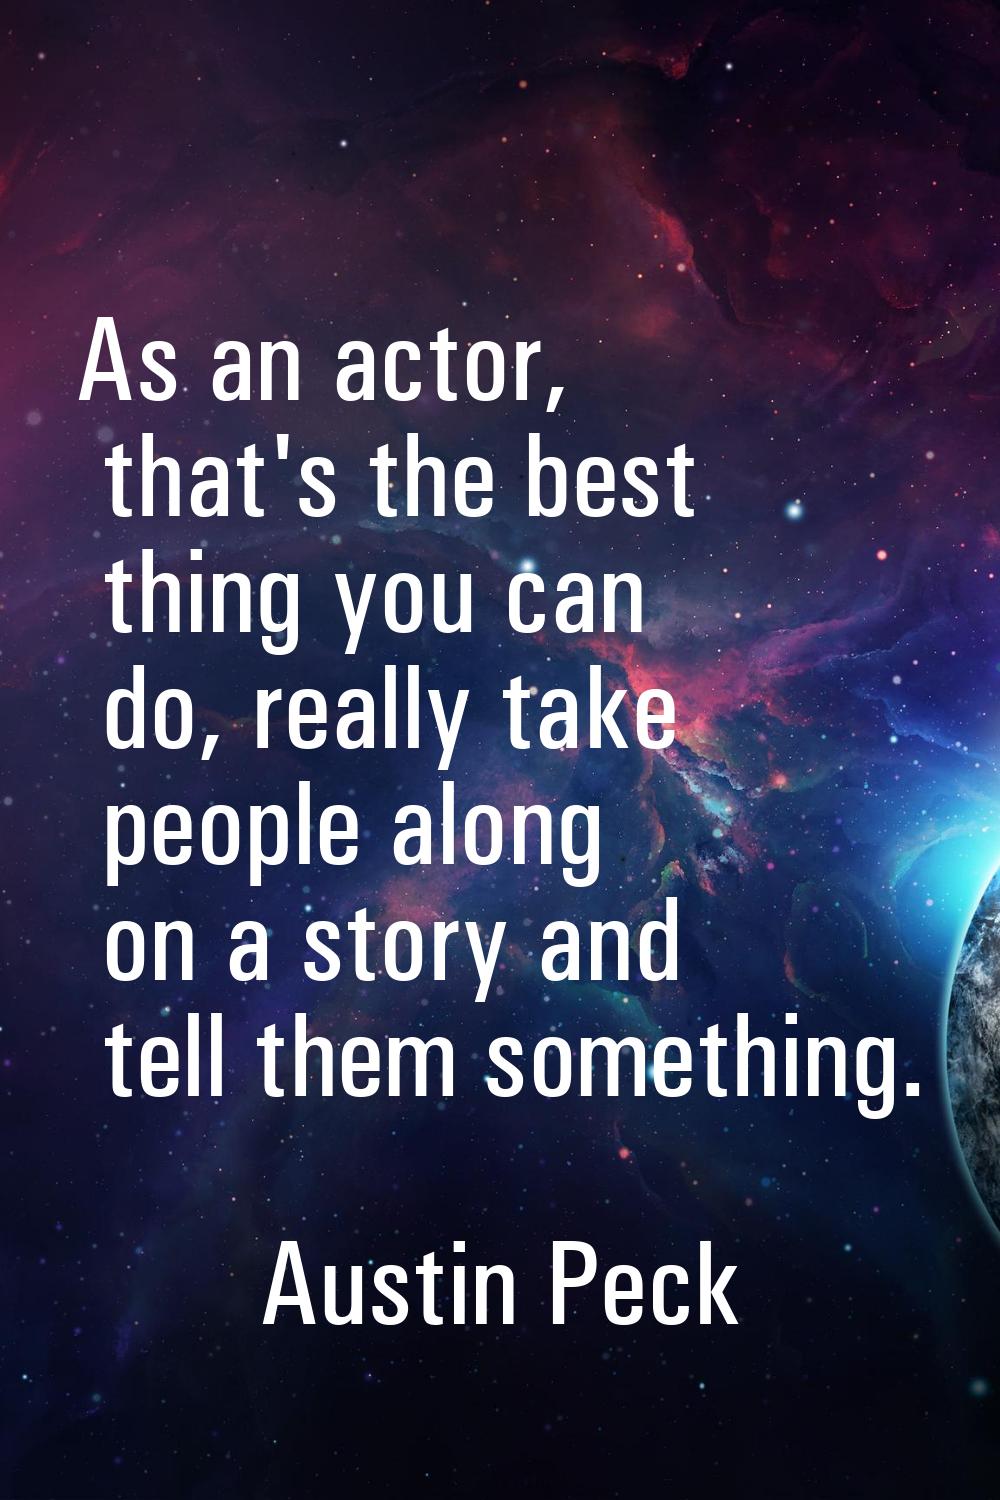 As an actor, that's the best thing you can do, really take people along on a story and tell them so